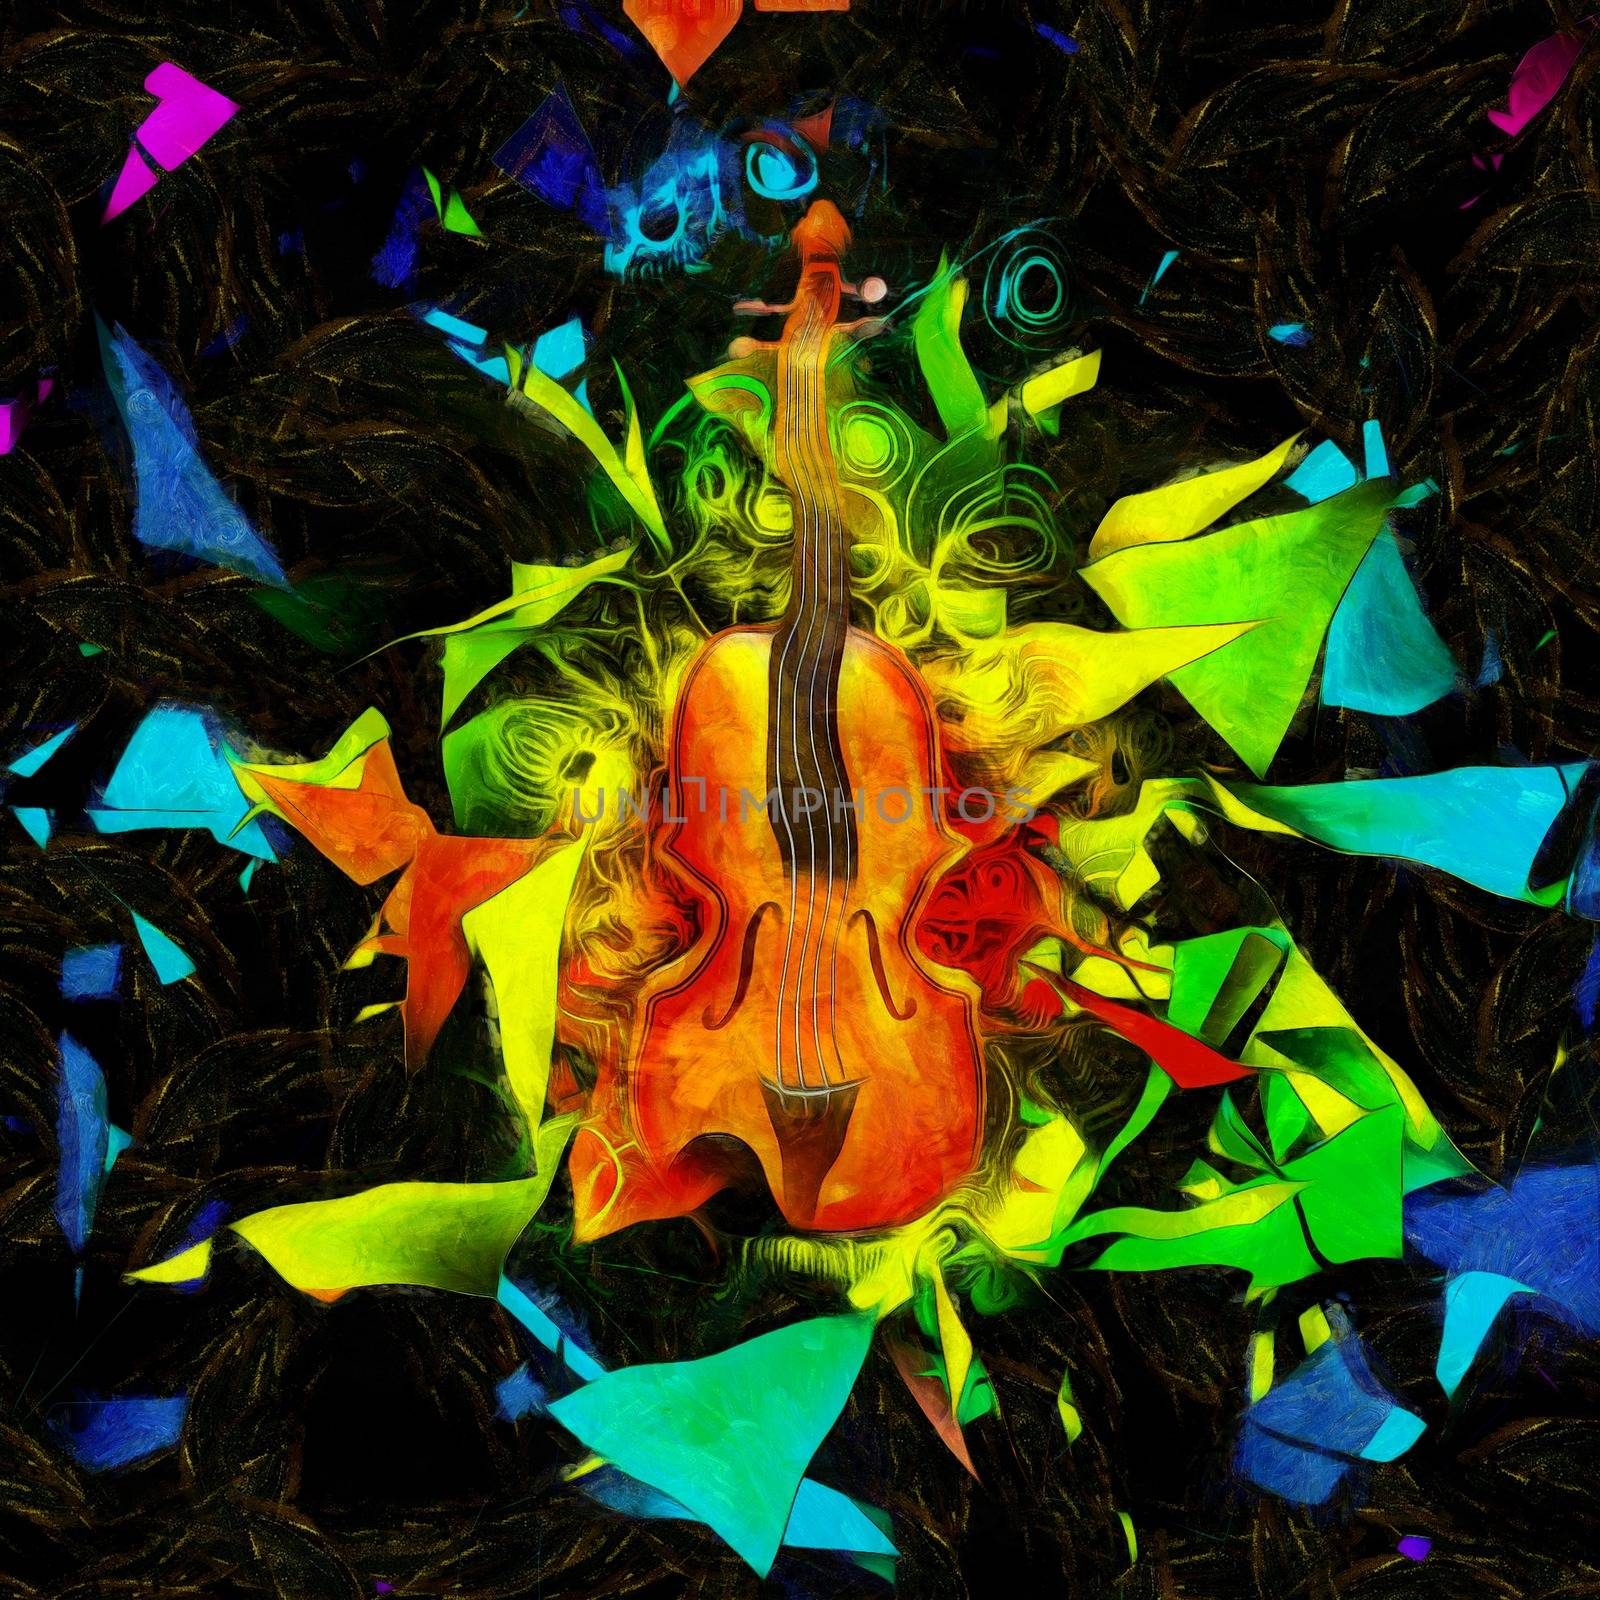 Digital modern painting. Violin on abstract background.